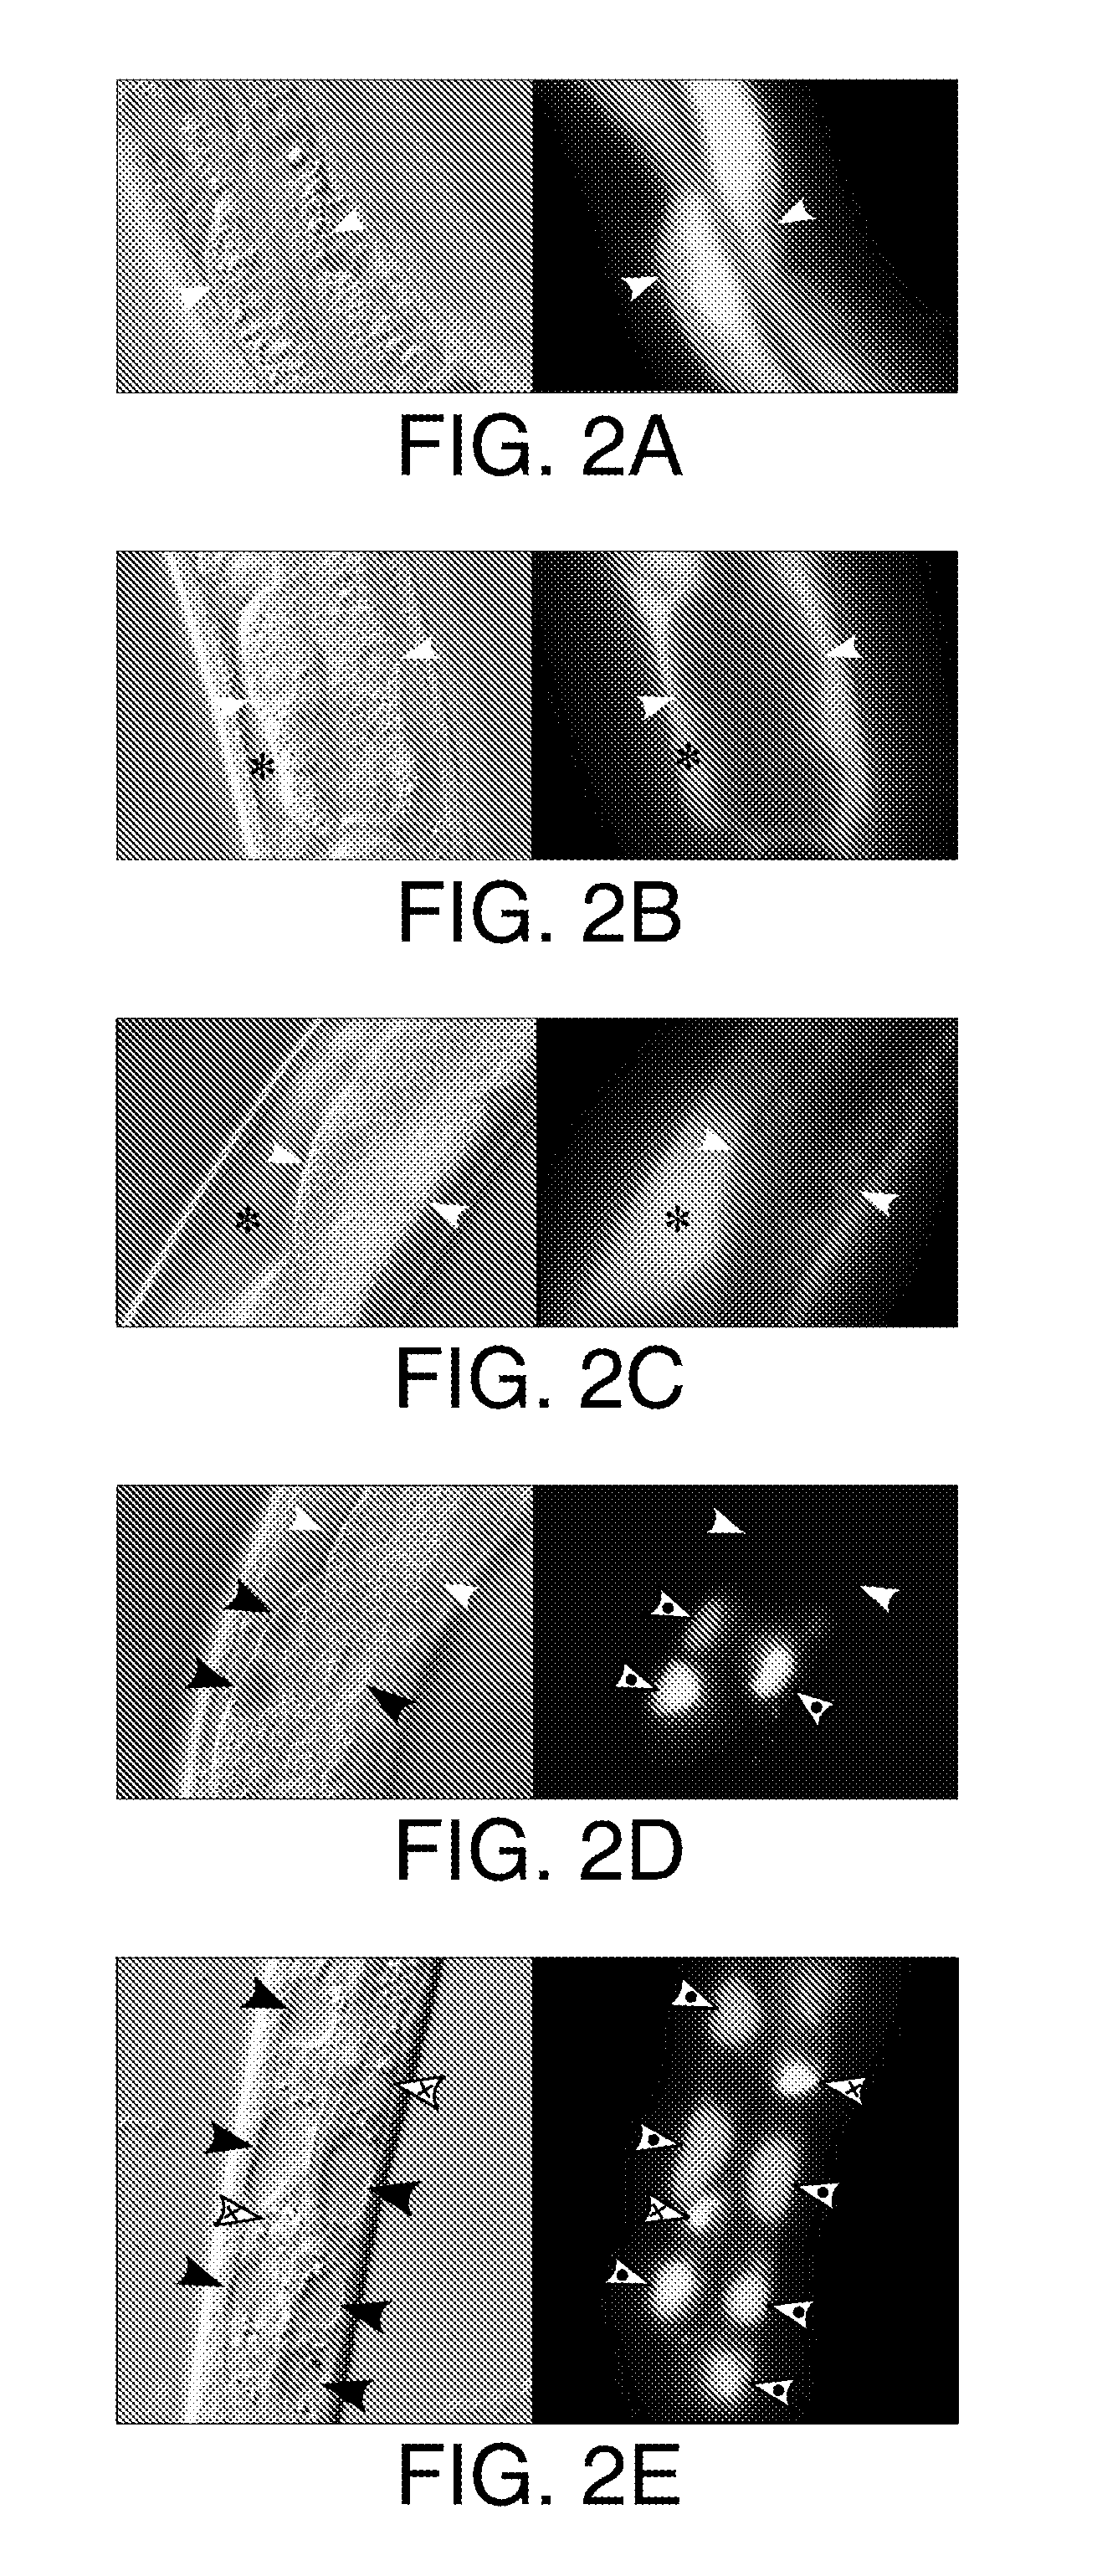 Methods of Treating Disorders Associated with Protein Aggregation